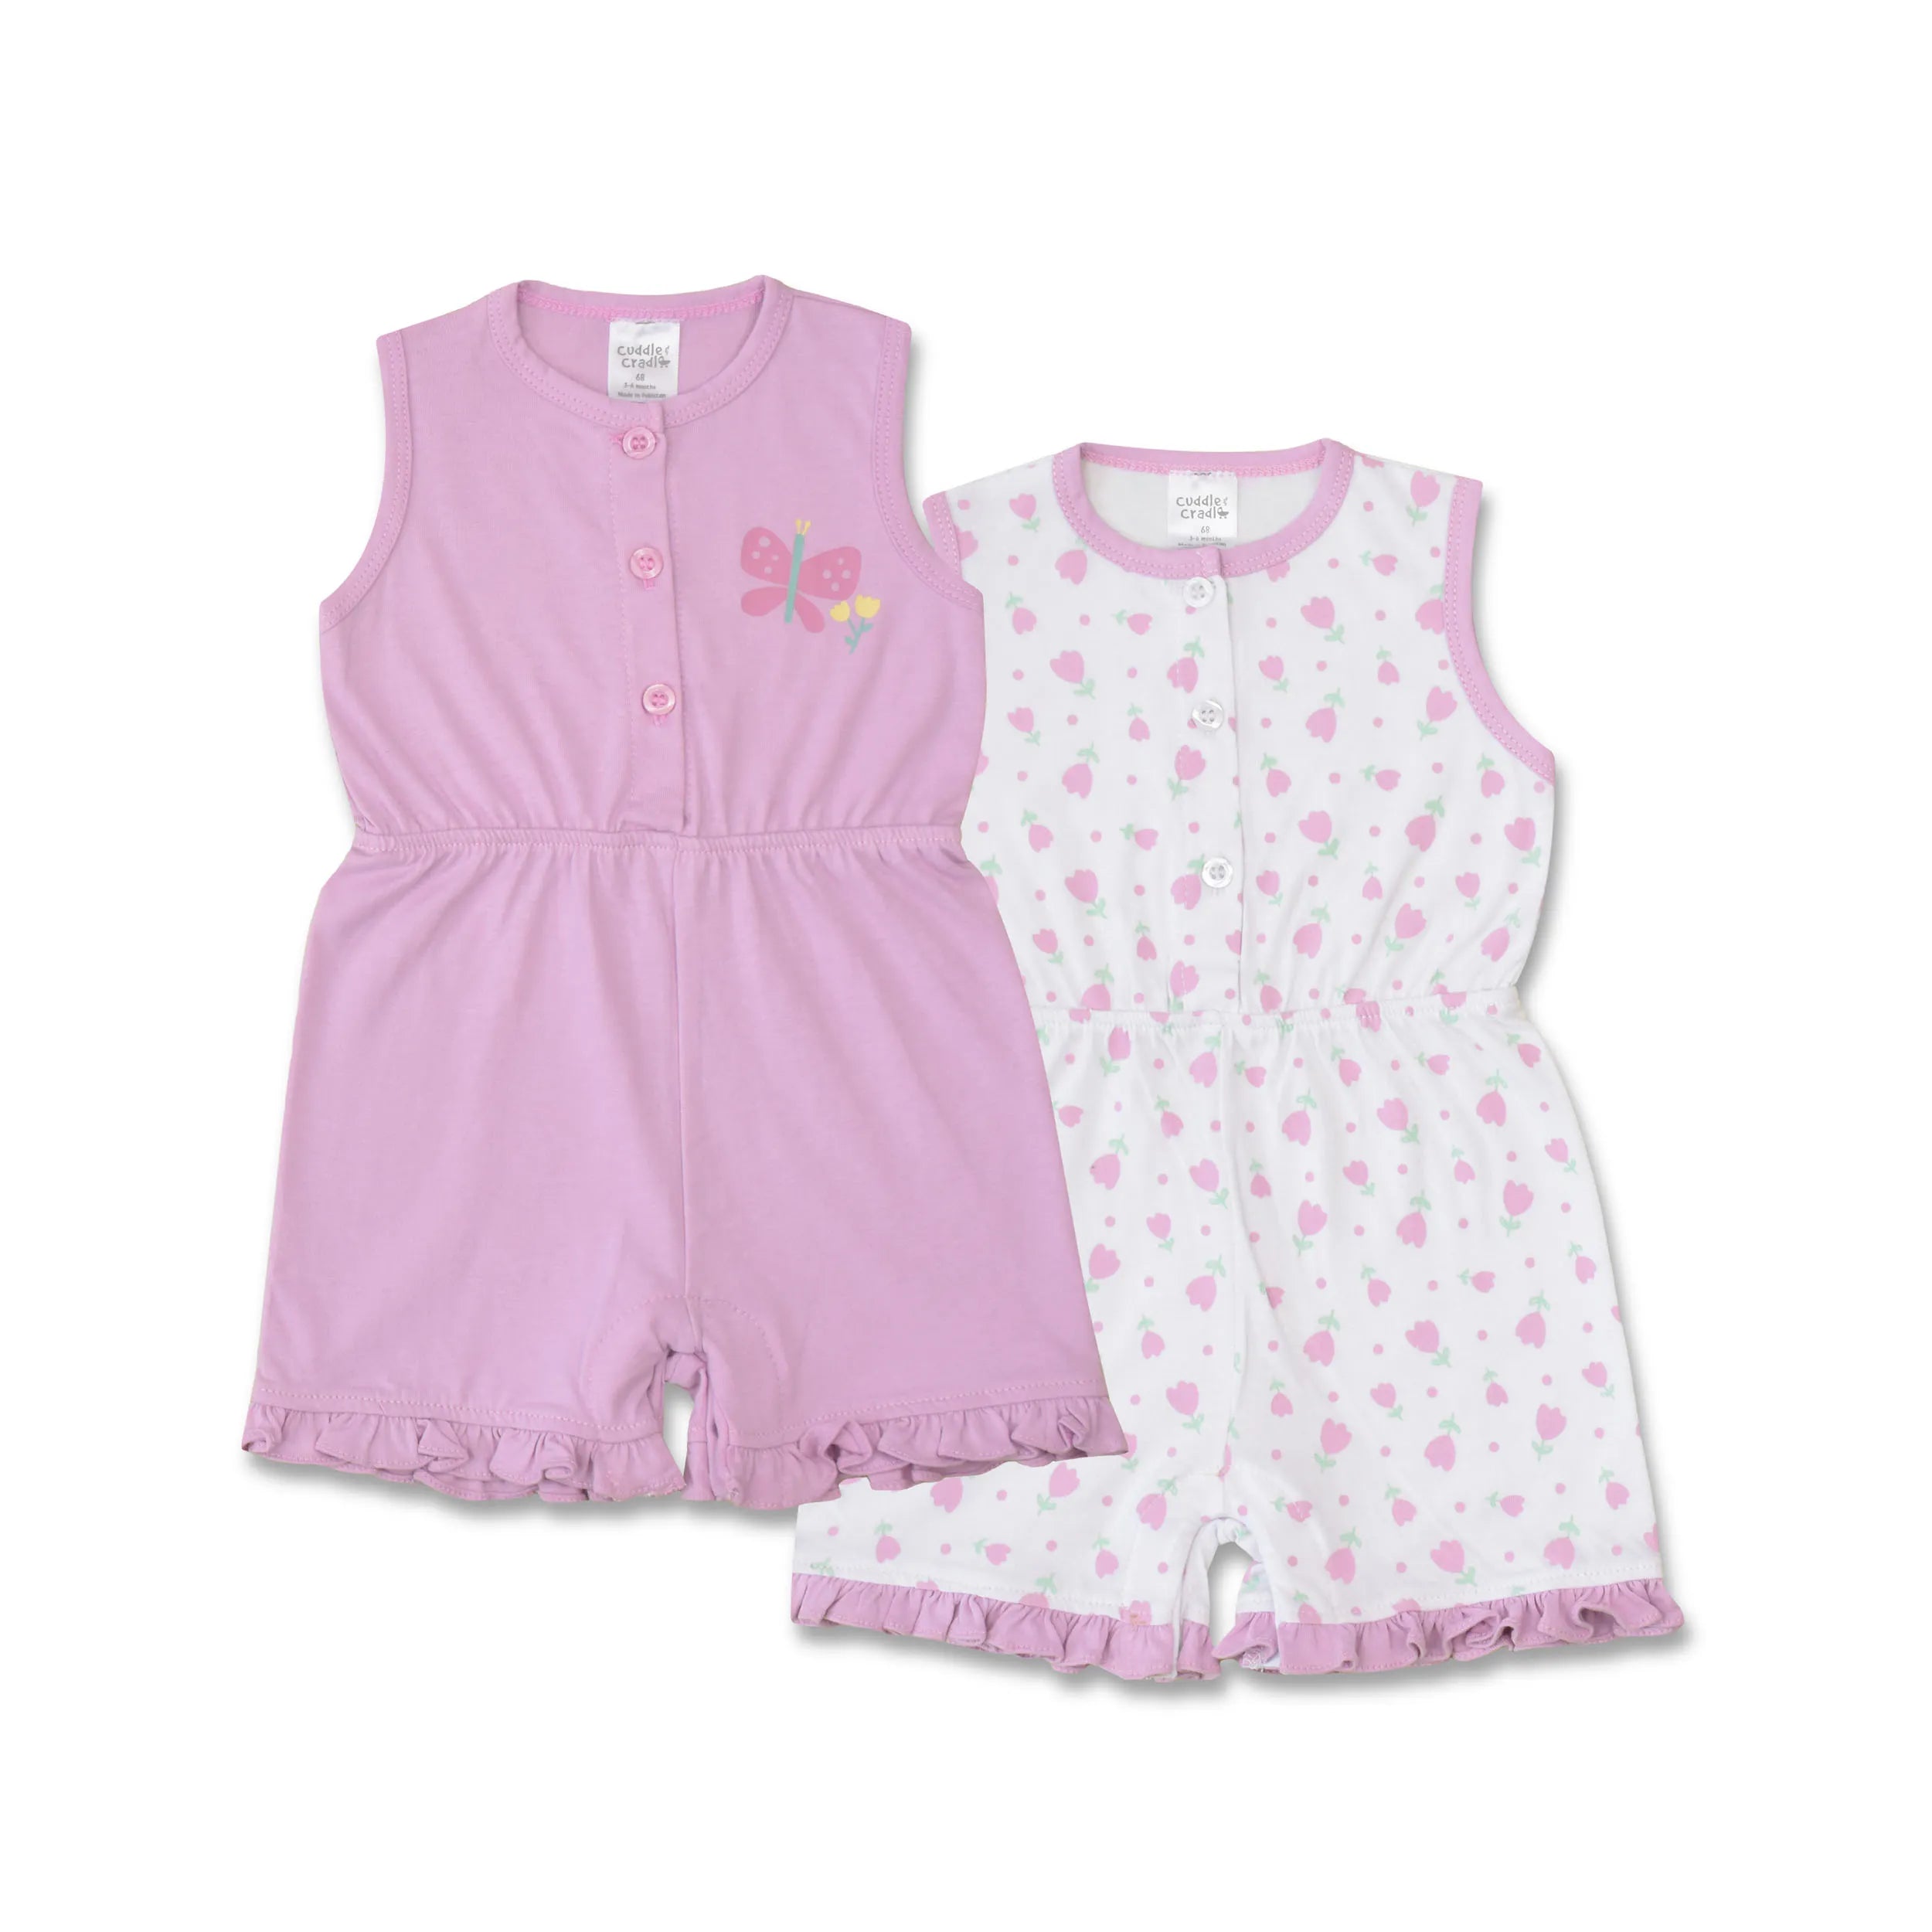 Set of 2 Girls Playsuits (Floral)